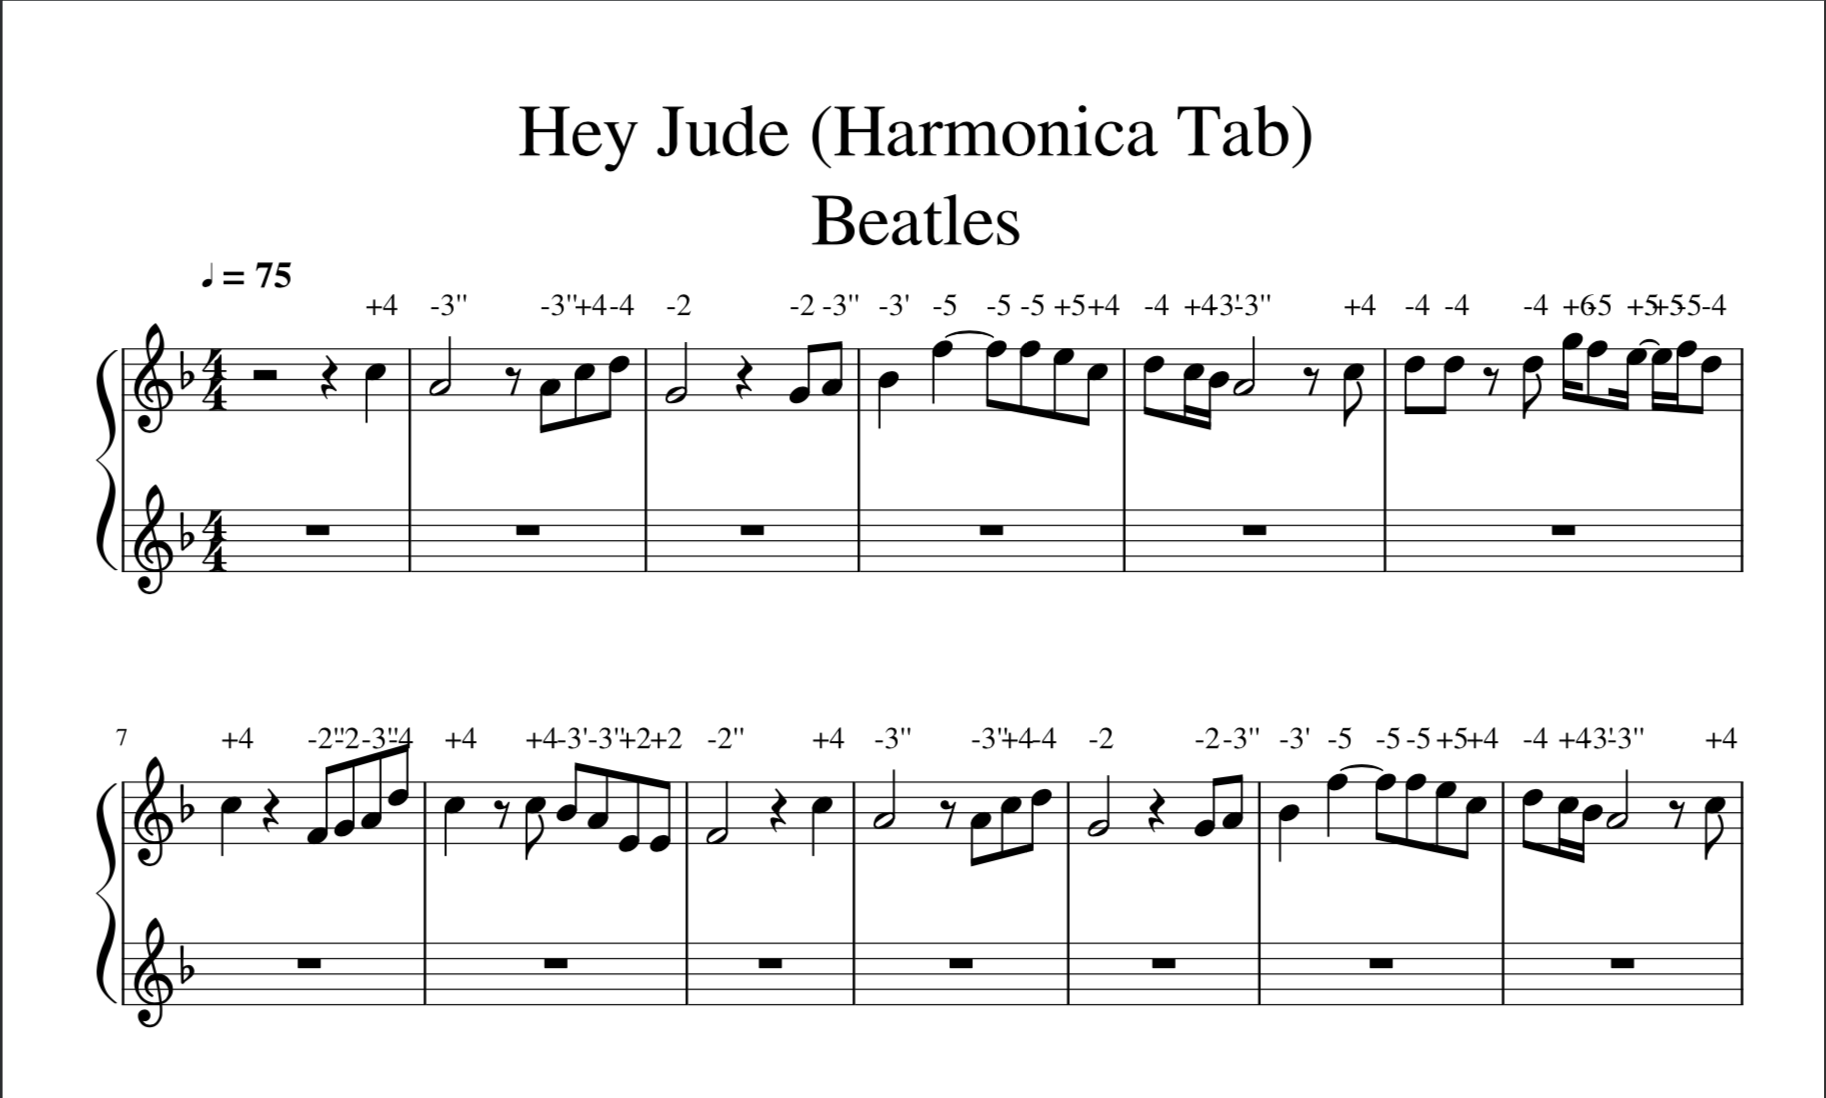 How to generate harmonica tabs from MIDI